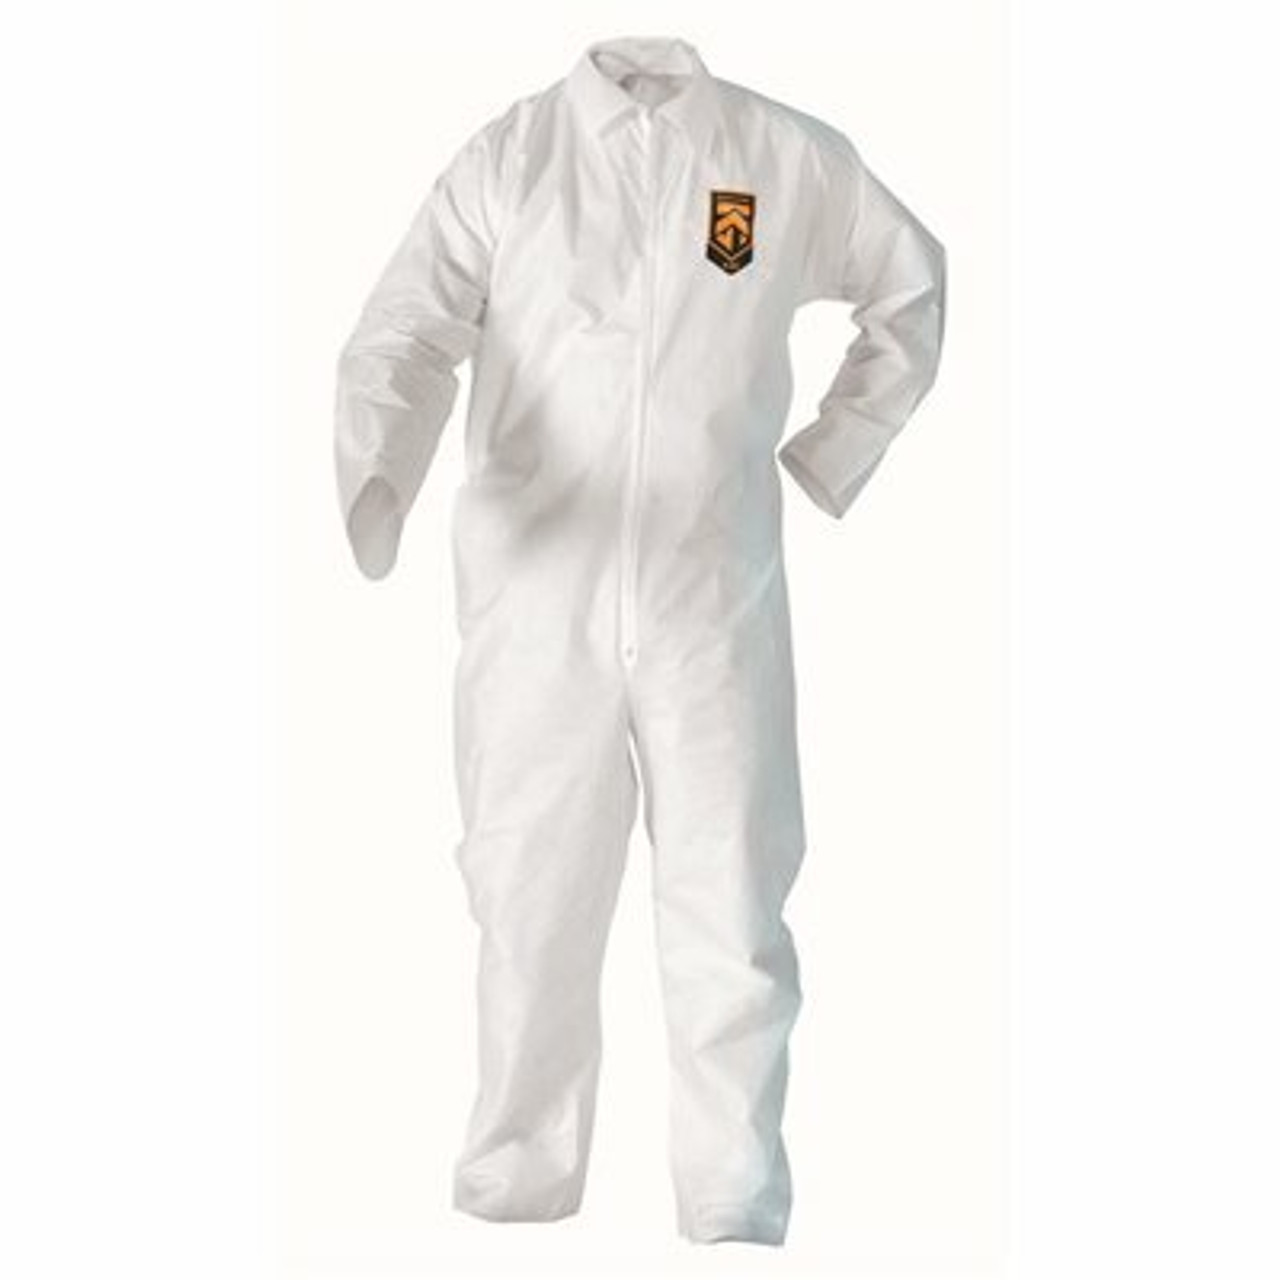 Kleenguard A20 Breathable Particle Protection Coveralls (49005), Reflex Design, Zip Front, White, 2Xl, 24 / Case